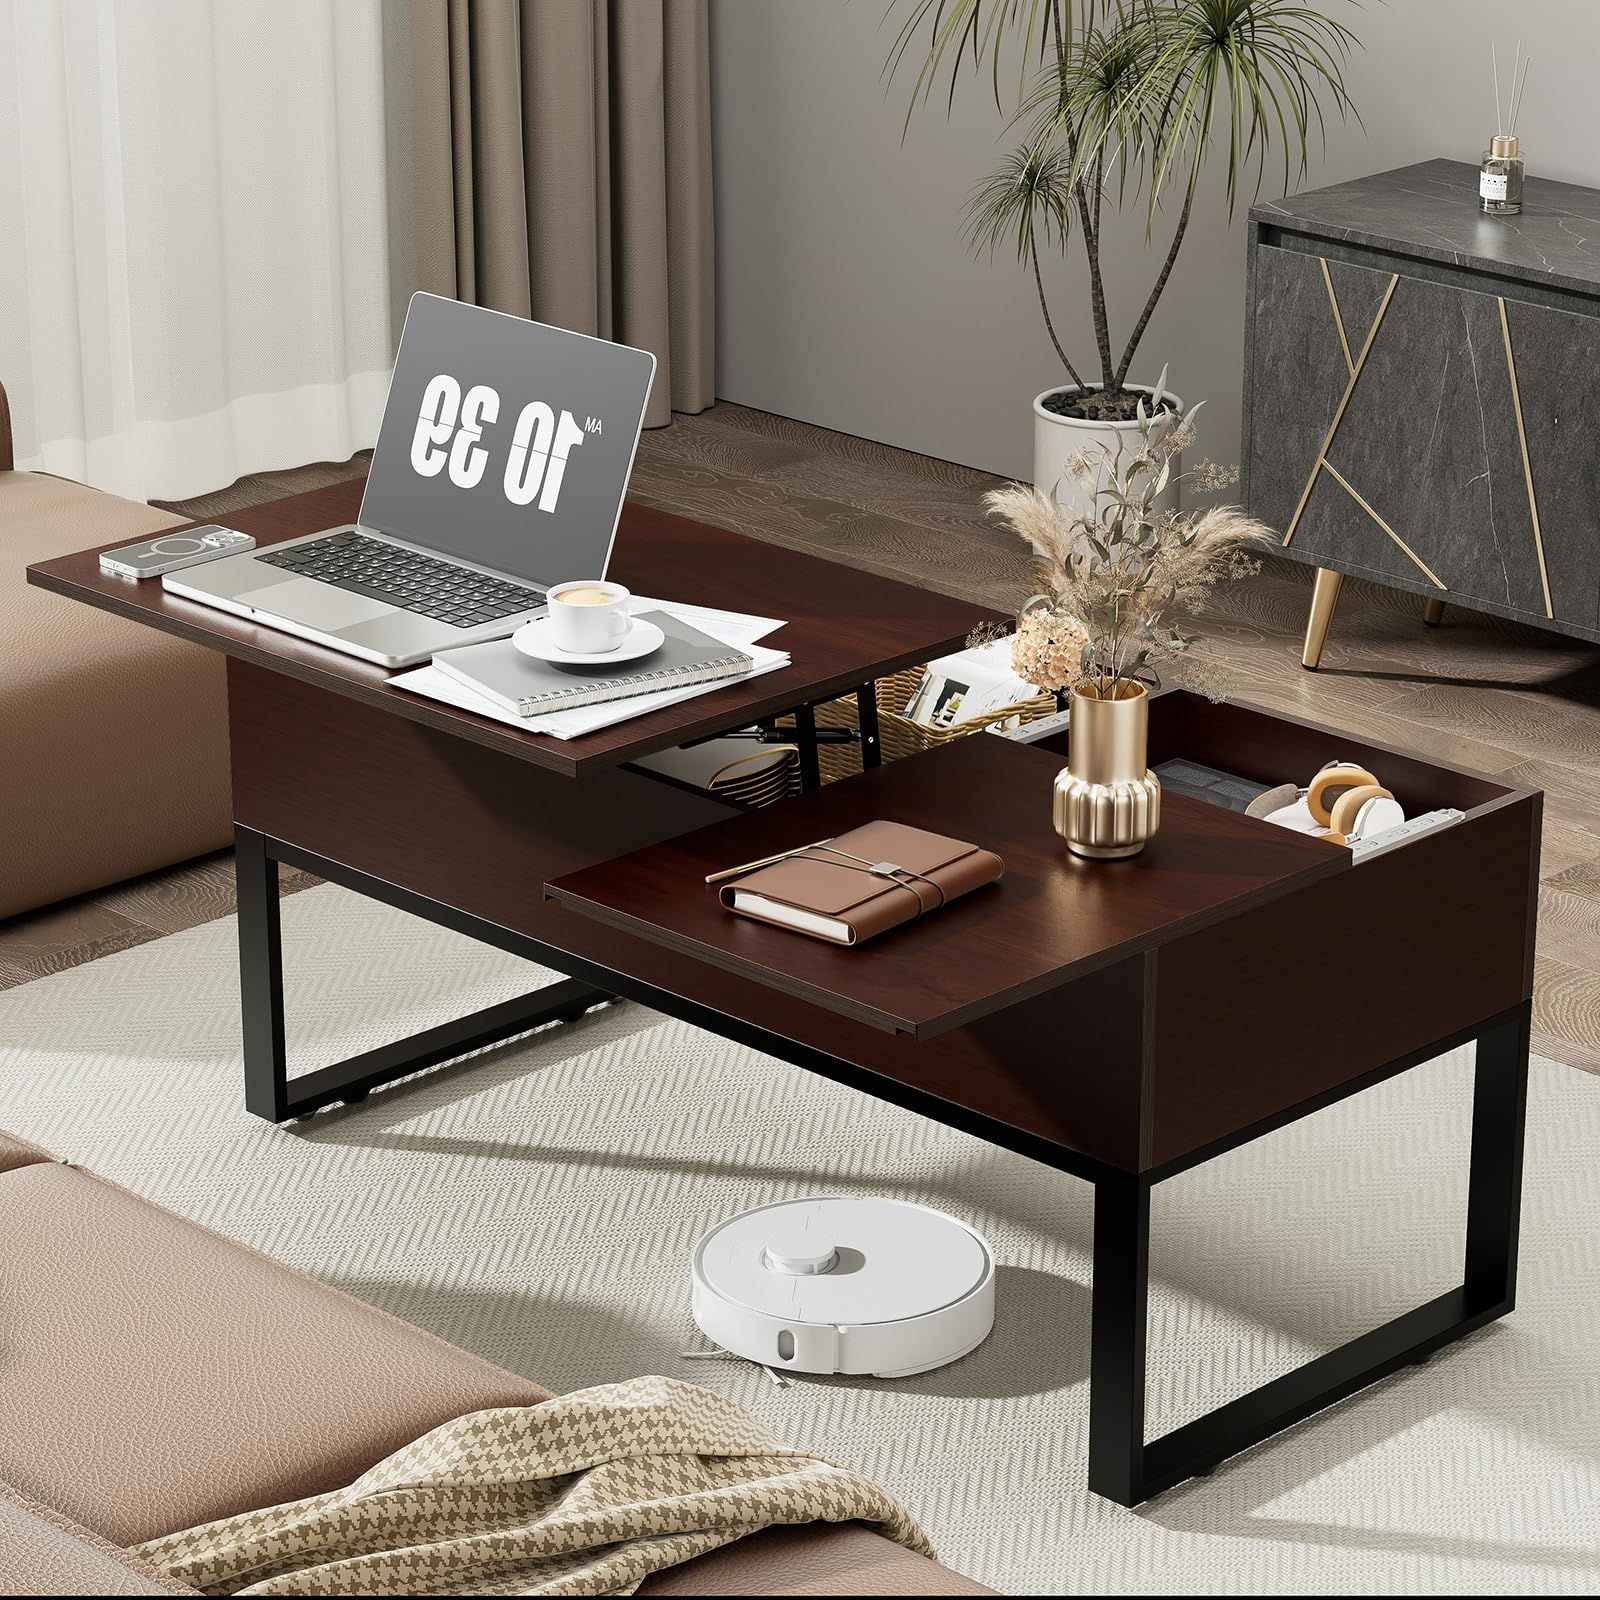 Most Recent Lift Top Coffee Tables With Storage Within Amazon: Veelok Lift Top Coffee Table For Living Room With Hidden Storage  Compartment On Rolling Wheels, 3 Way Slide Desktop Drawer Modern Coffee  Tables, 43.3" Wood Coffee Table, 440lbs Max Weight, Espresso : (Photo 2 of 10)